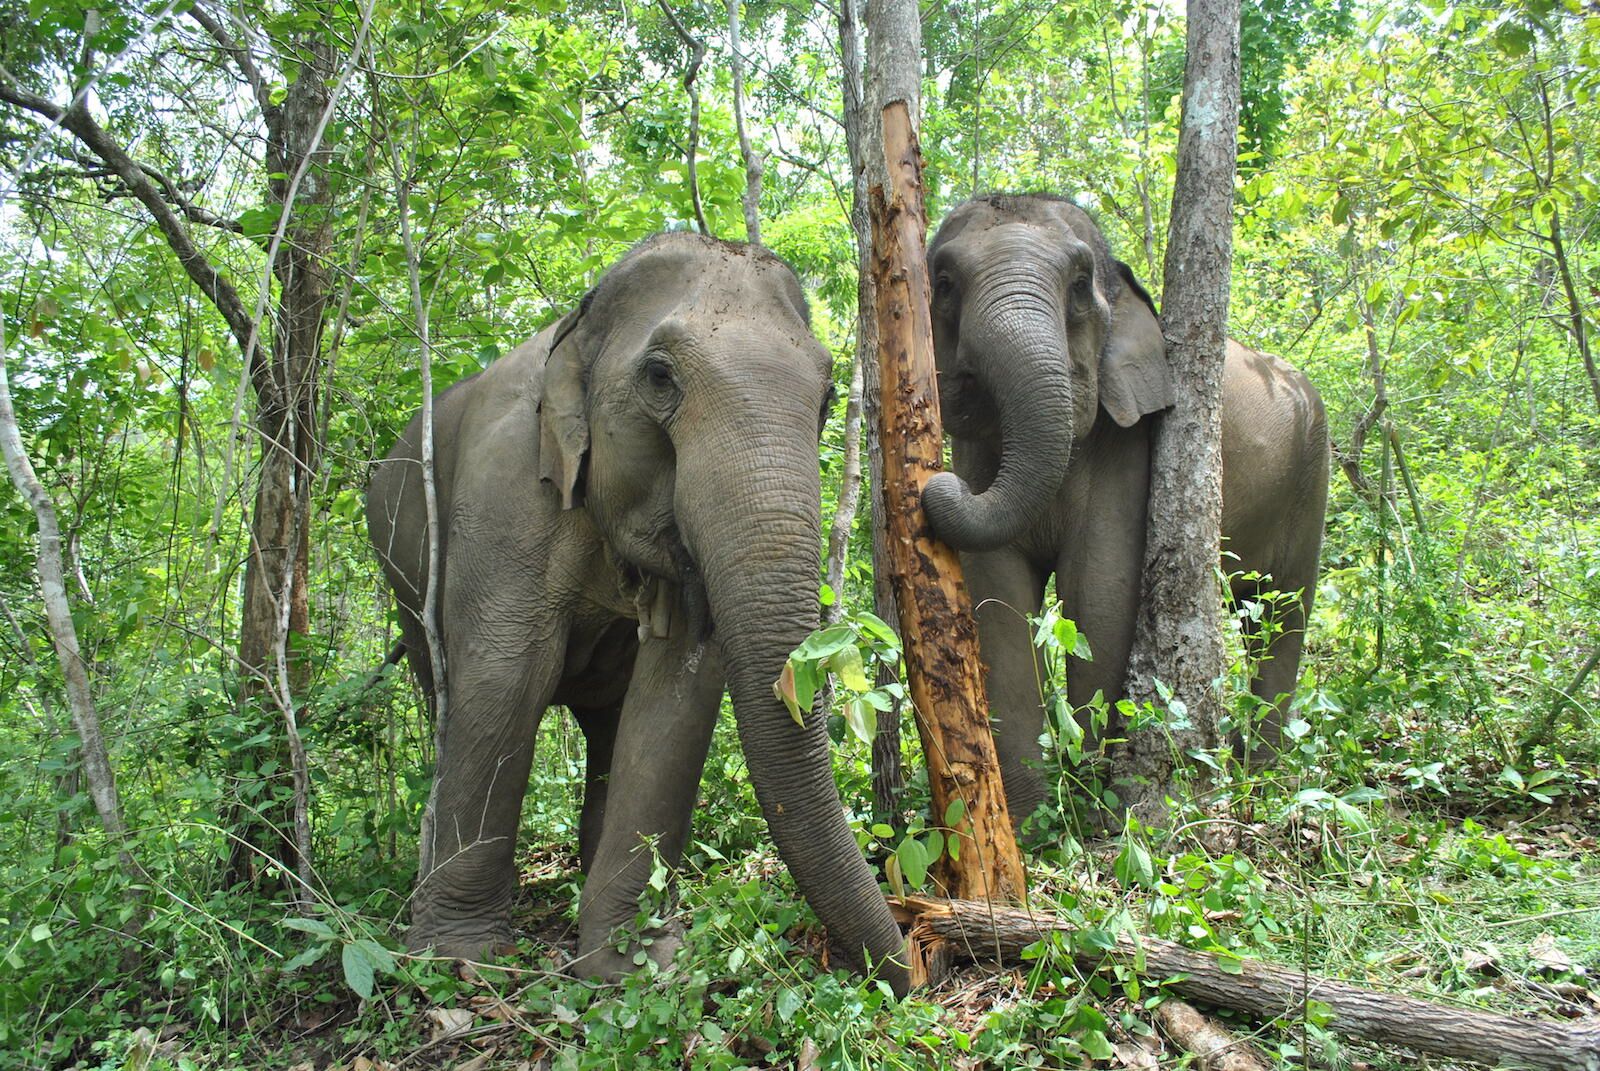 Elephants displaying natural behavior by scratching on trees